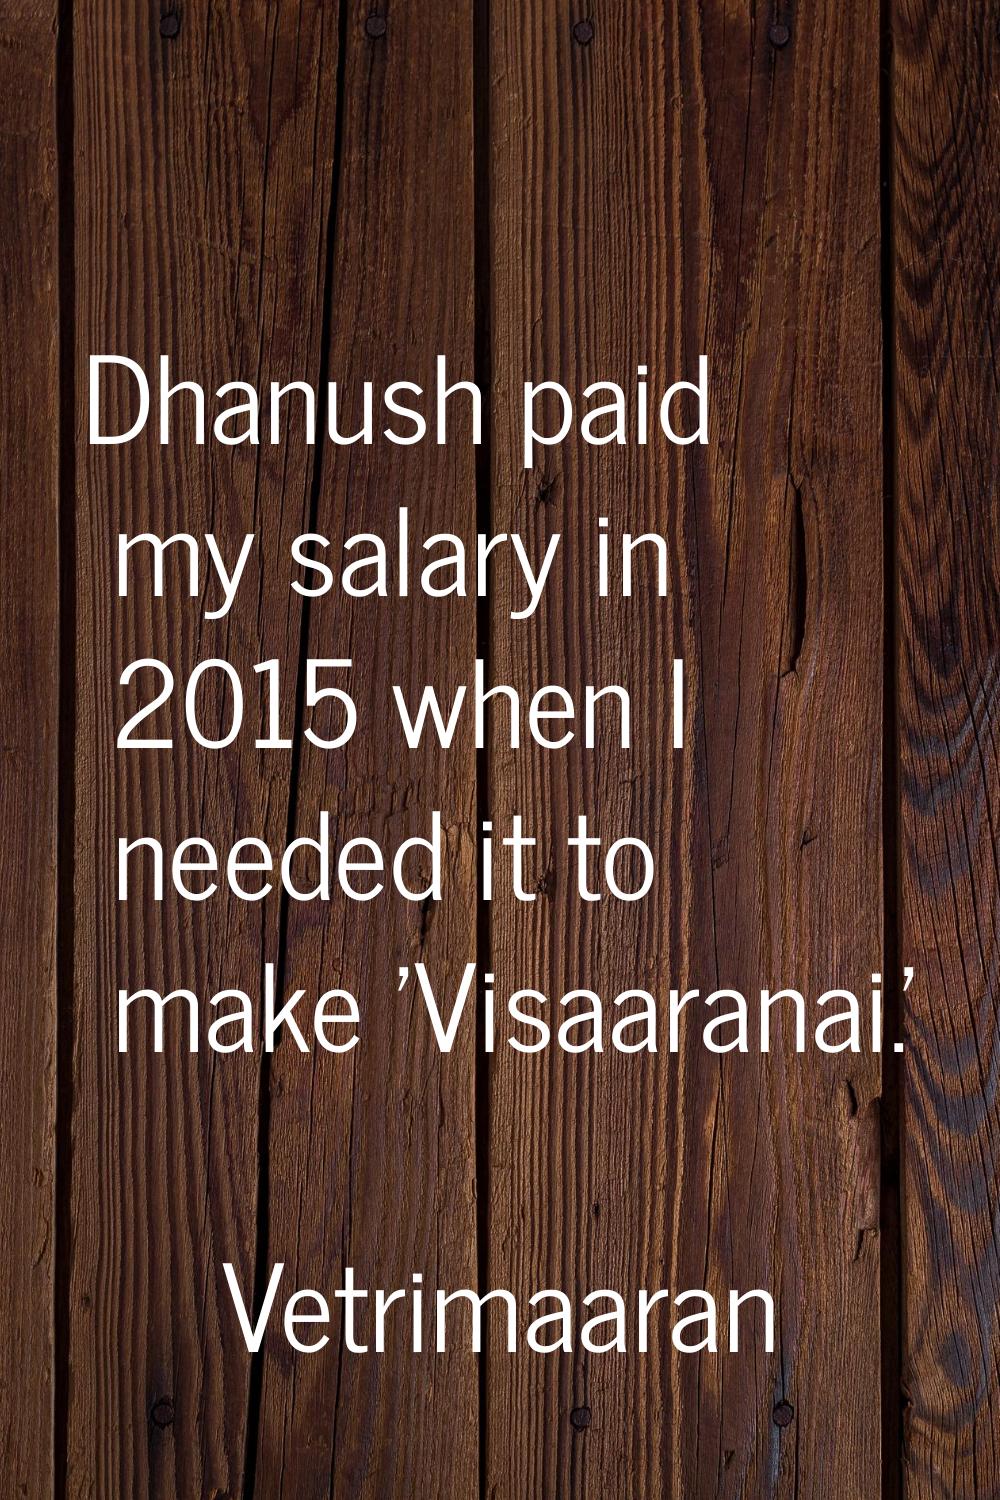 Dhanush paid my salary in 2015 when I needed it to make 'Visaaranai.'